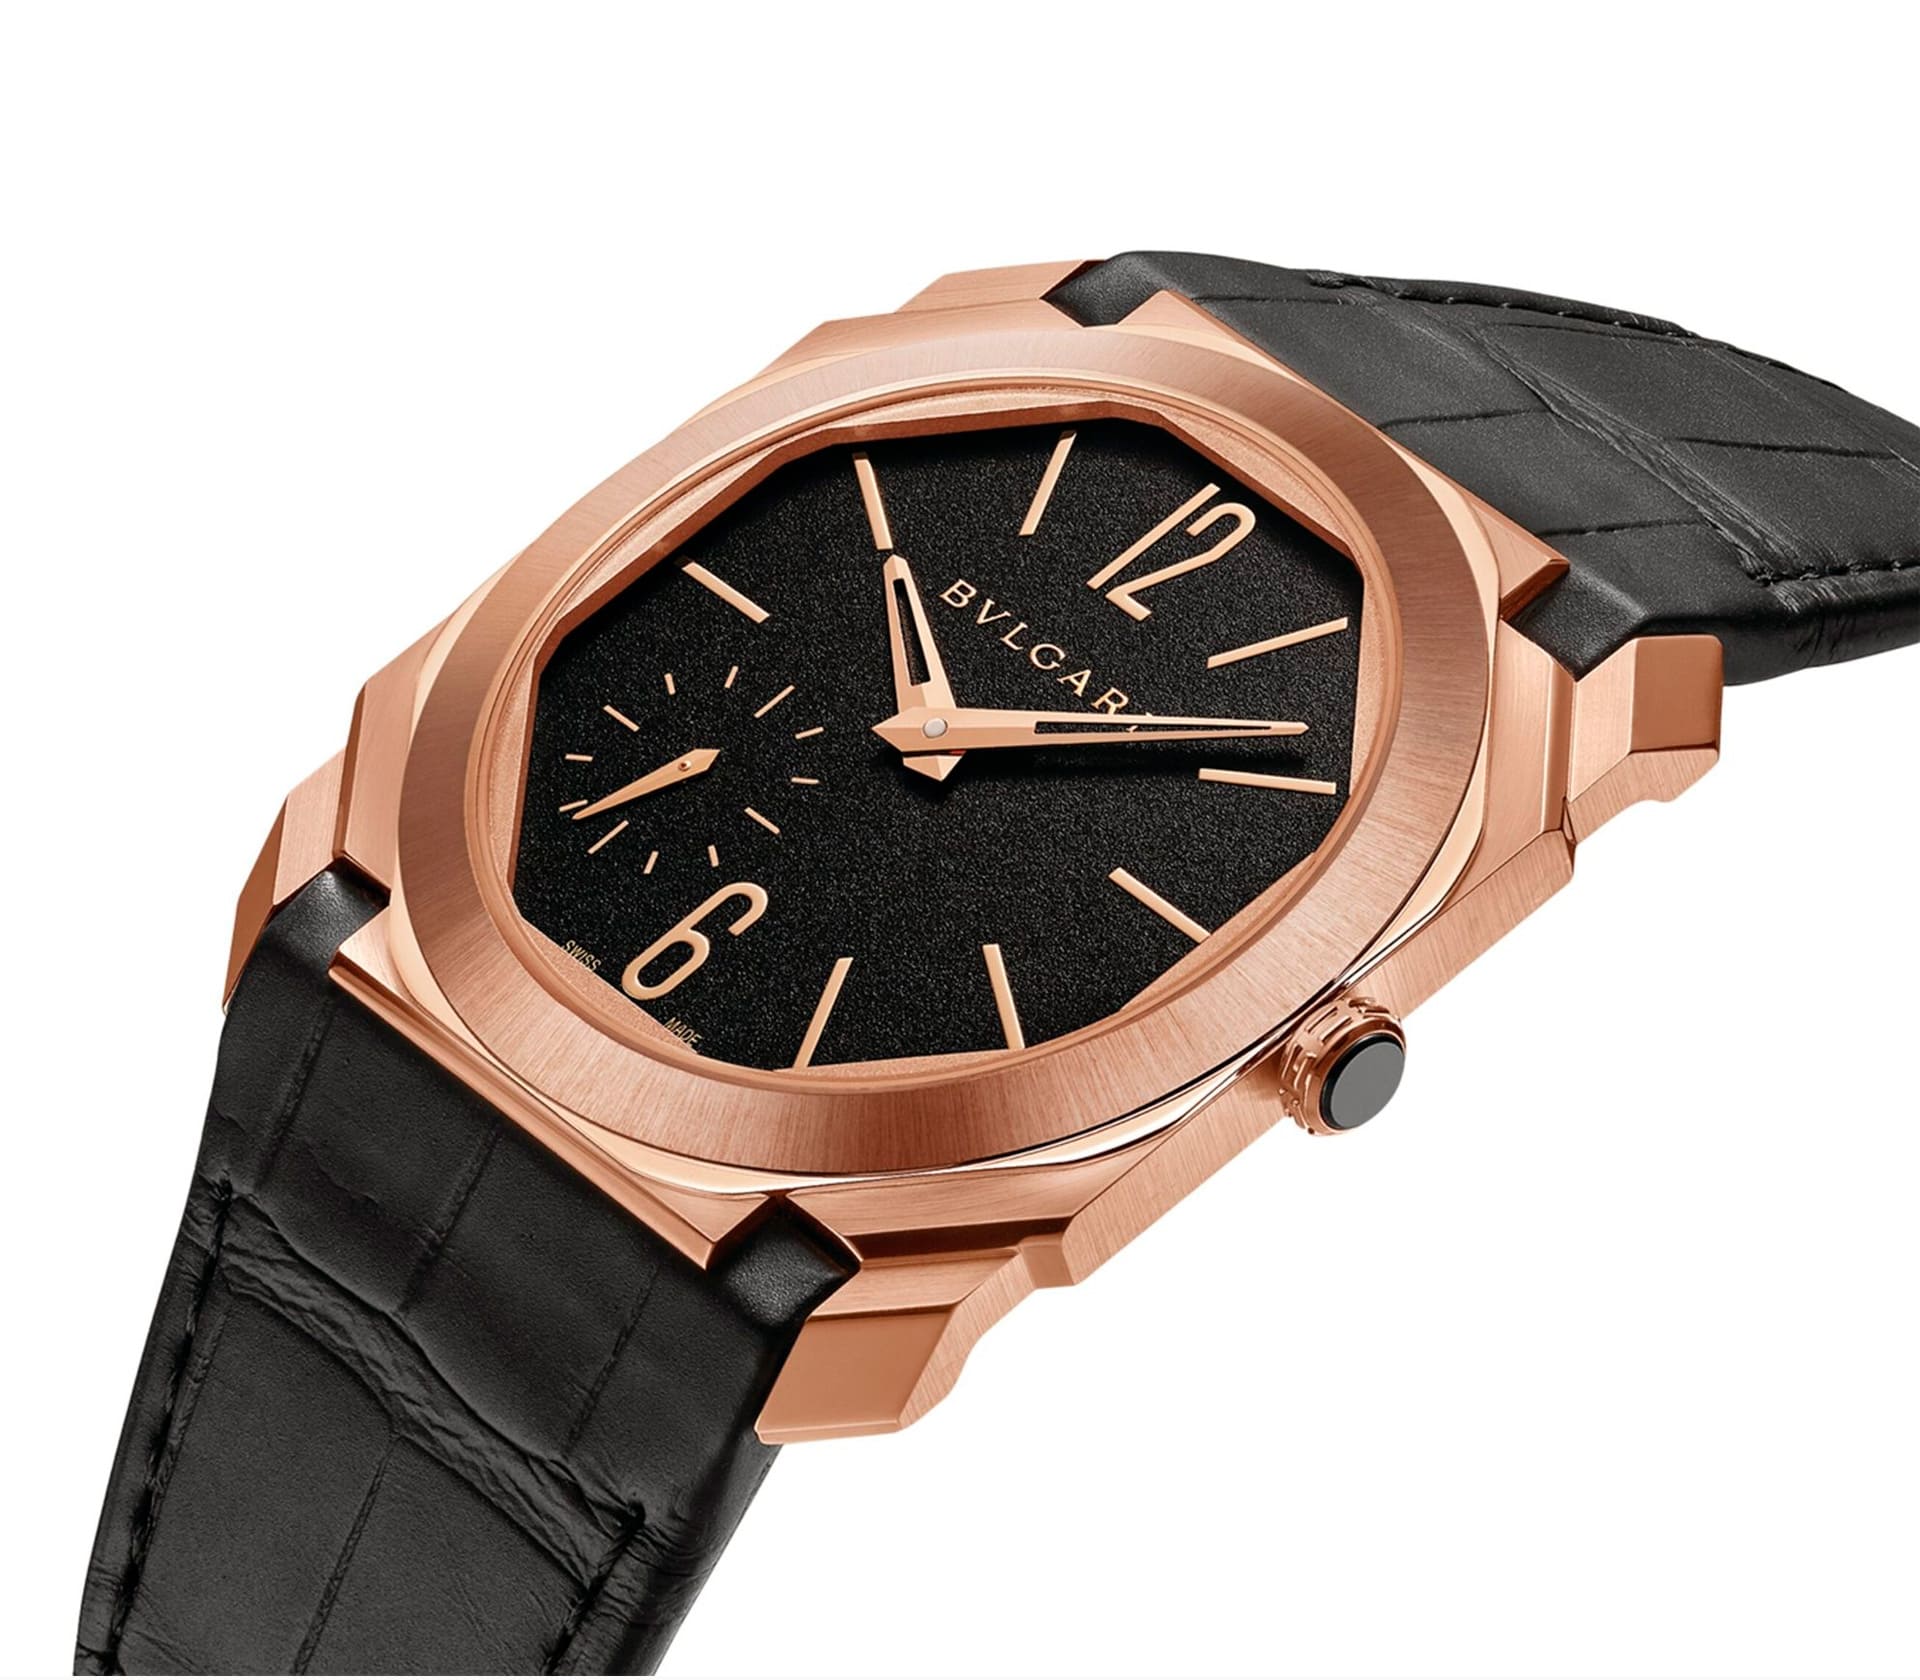 Octo Finissimo Automatic em Ouro Rosa 40mm